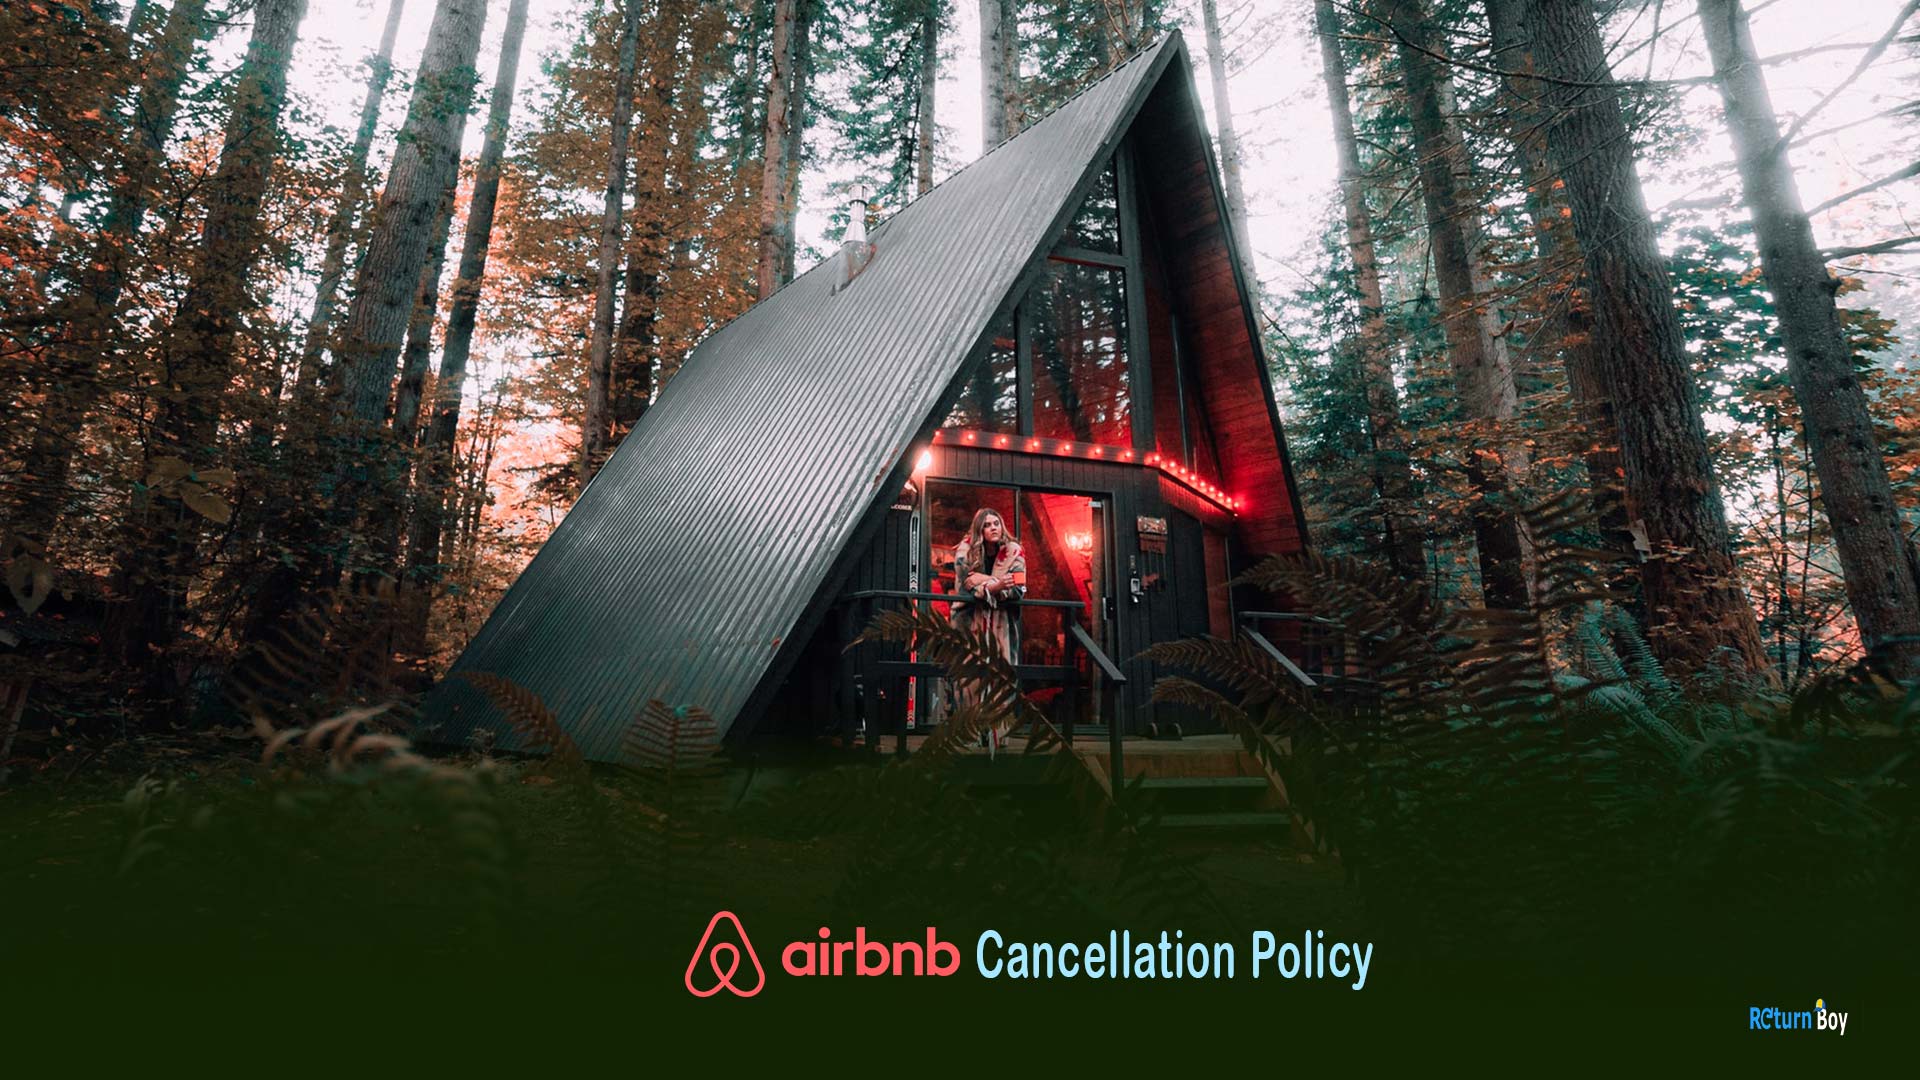 Airbnb Cancellation Policy